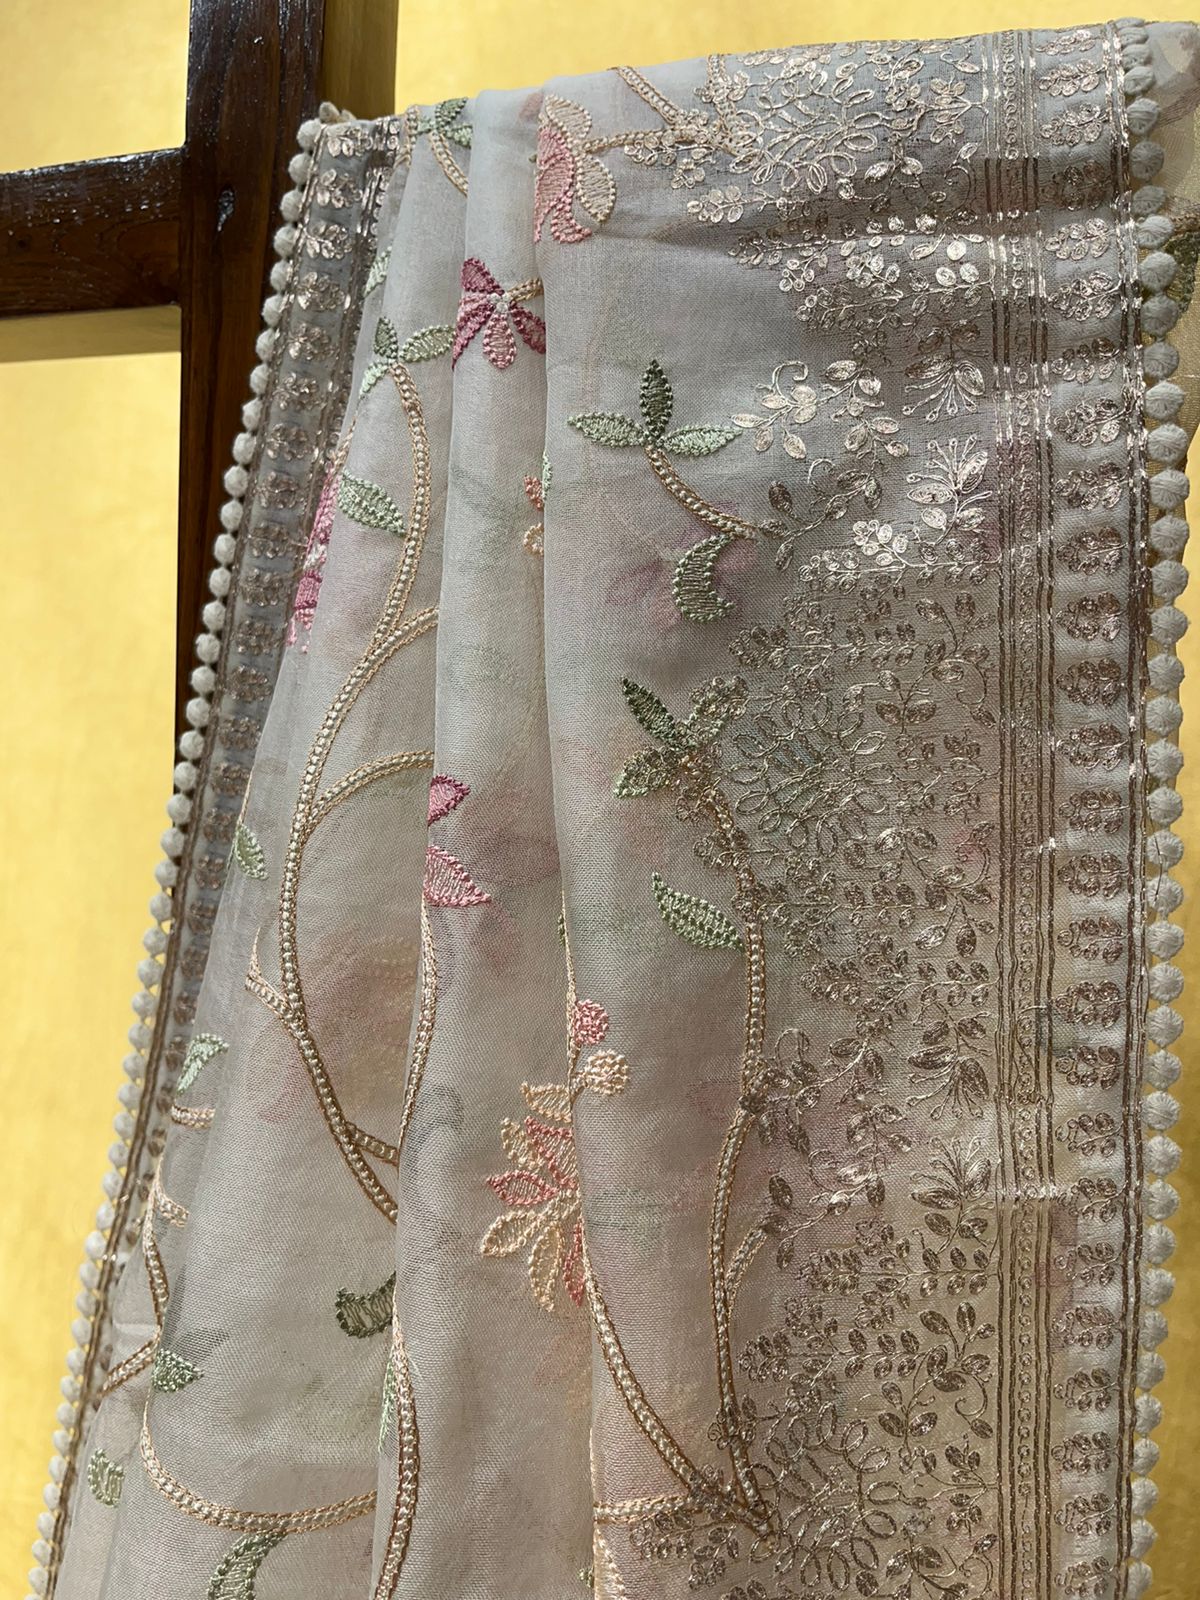 OFF WHITE ORGANZA SAREE EMBELLISHED WITH PITA WORK AND LAKHNAVI JAAL